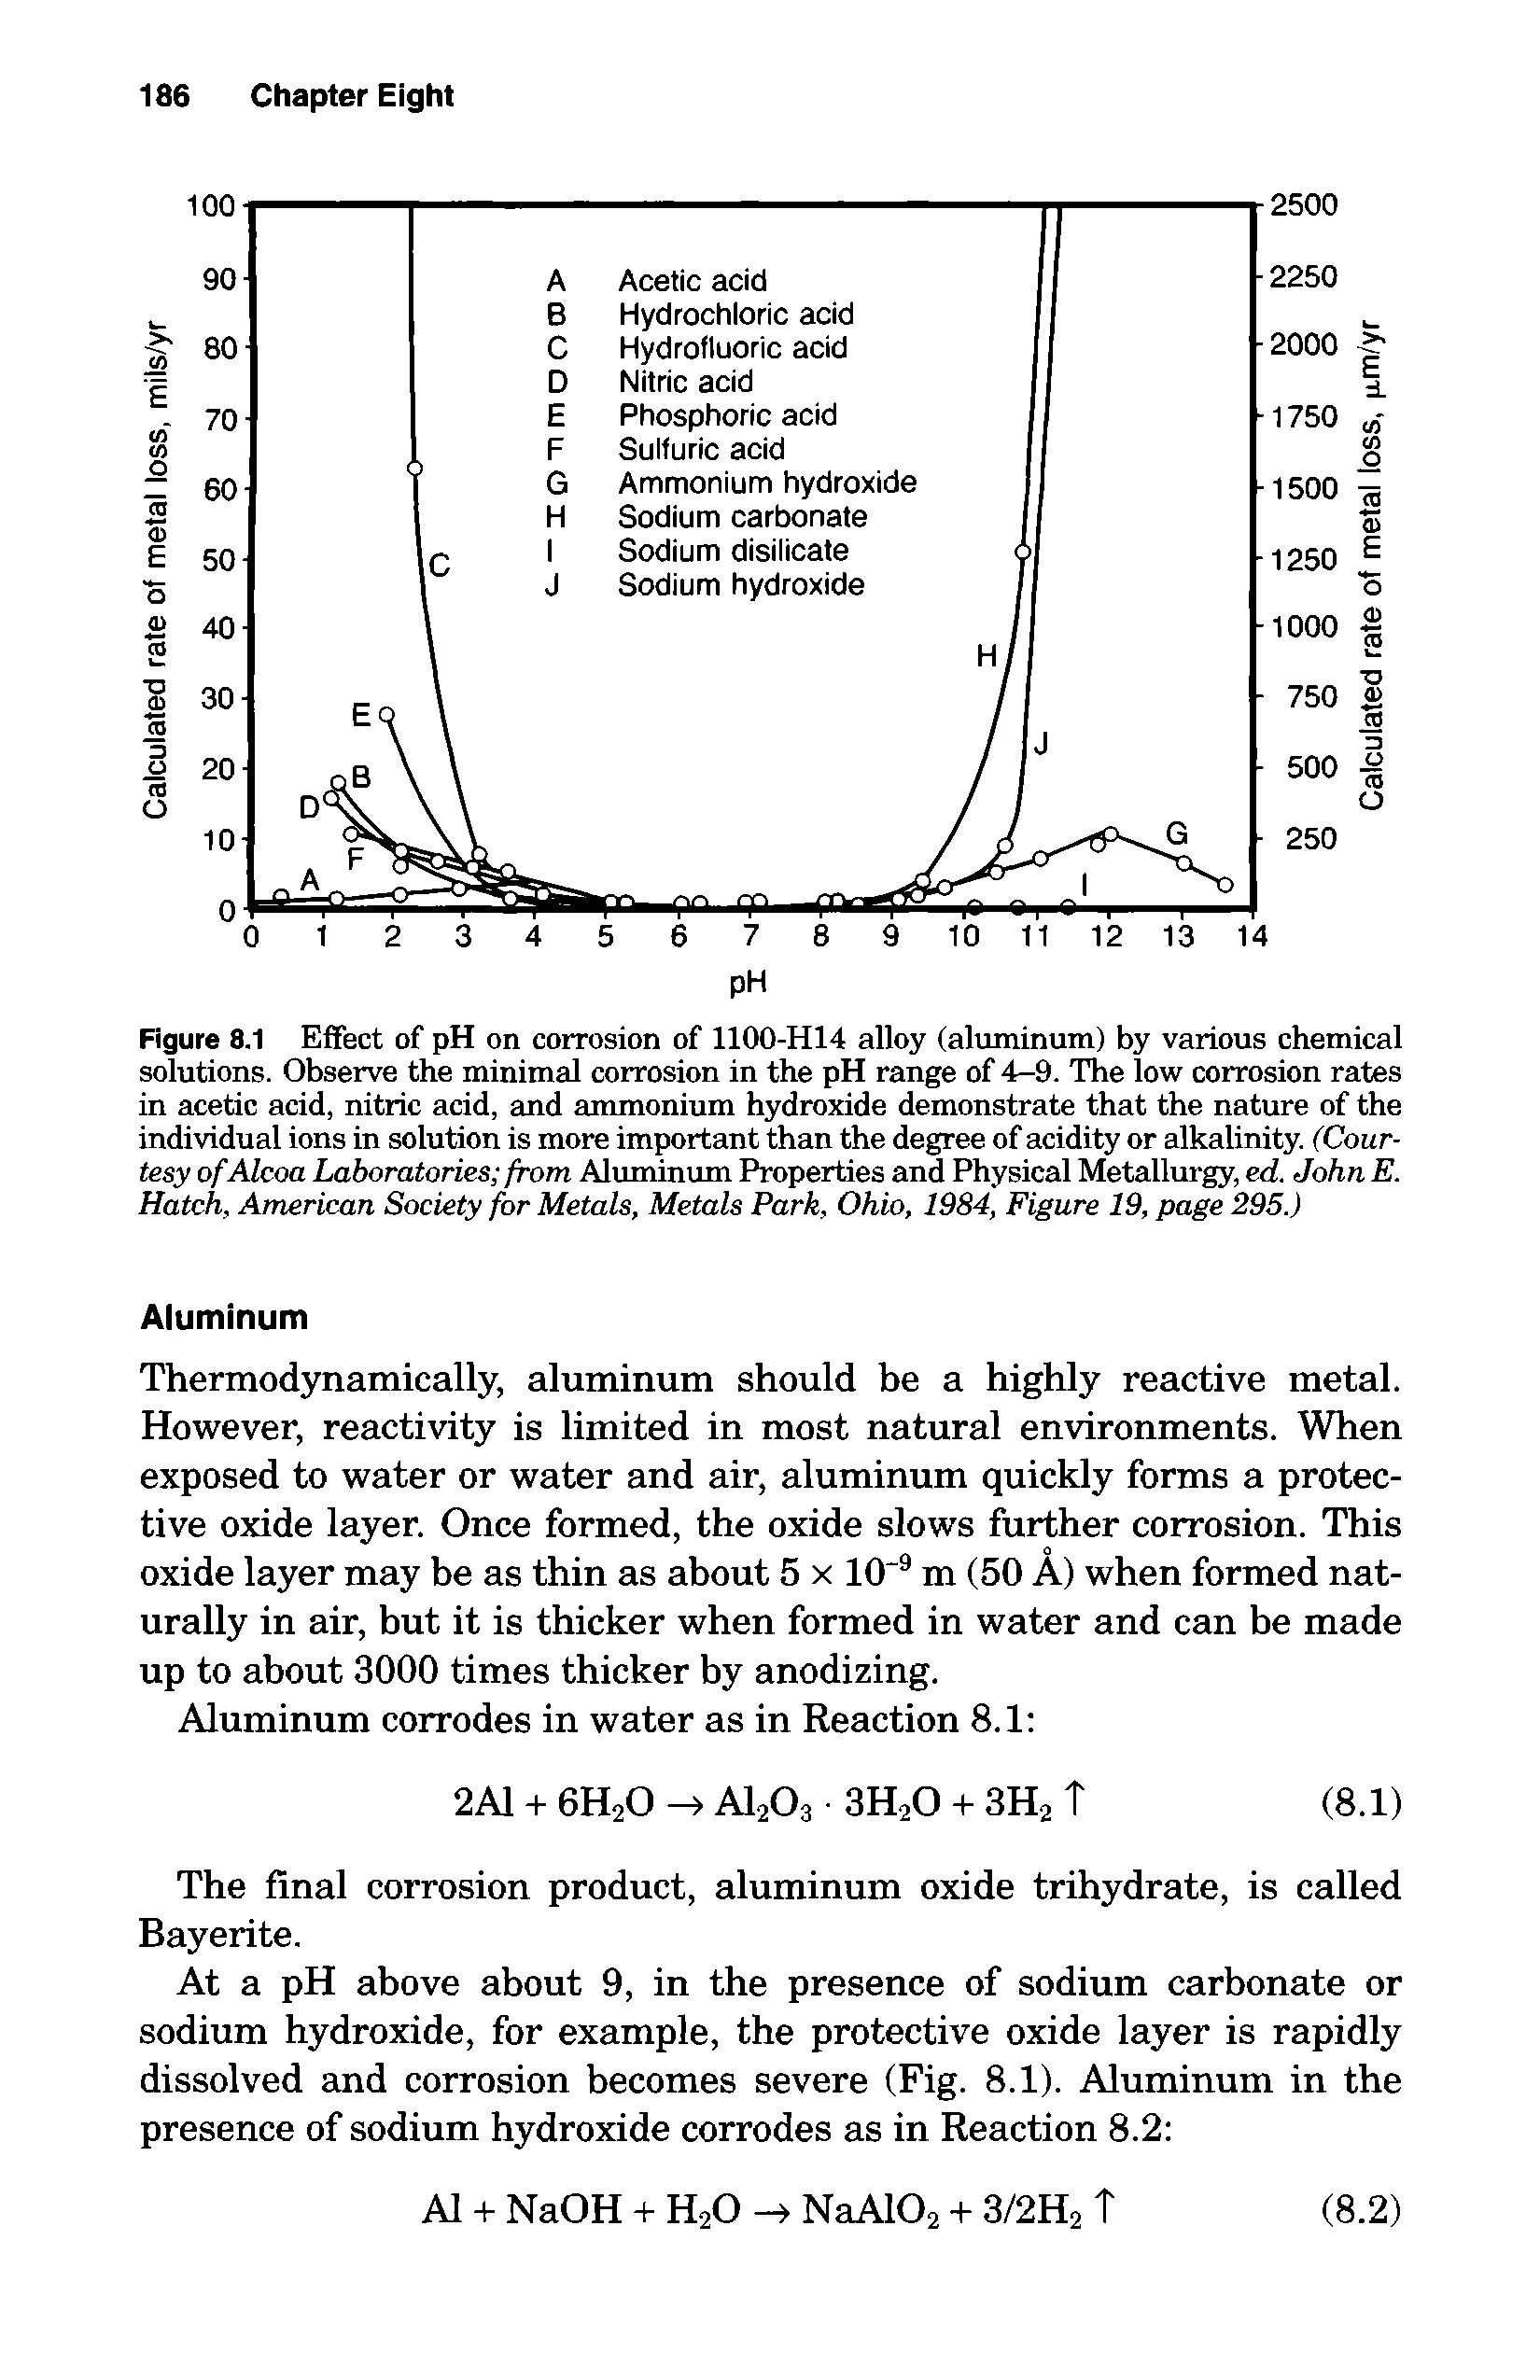 Figure 8.1 Effect of pH on corrosion of 1100-H14 alloy (aluminum) by various chemical solutions. Observe the minimal corrosion in the pH range of 4-9. The low corrosion rates in acetic acid, nitric acid, and ammonium hydroxide demonstrate that the nature of the individual ions in solution is more important than the degree of acidity or alkalinity. (Courtesy of Alcoa Laboratories from Aluminum Properties and Physical Metallurgy, ed. John E. Hatch, American Society for Metals, Metals Park, Ohio, 1984, Figure 19, page 295.)...